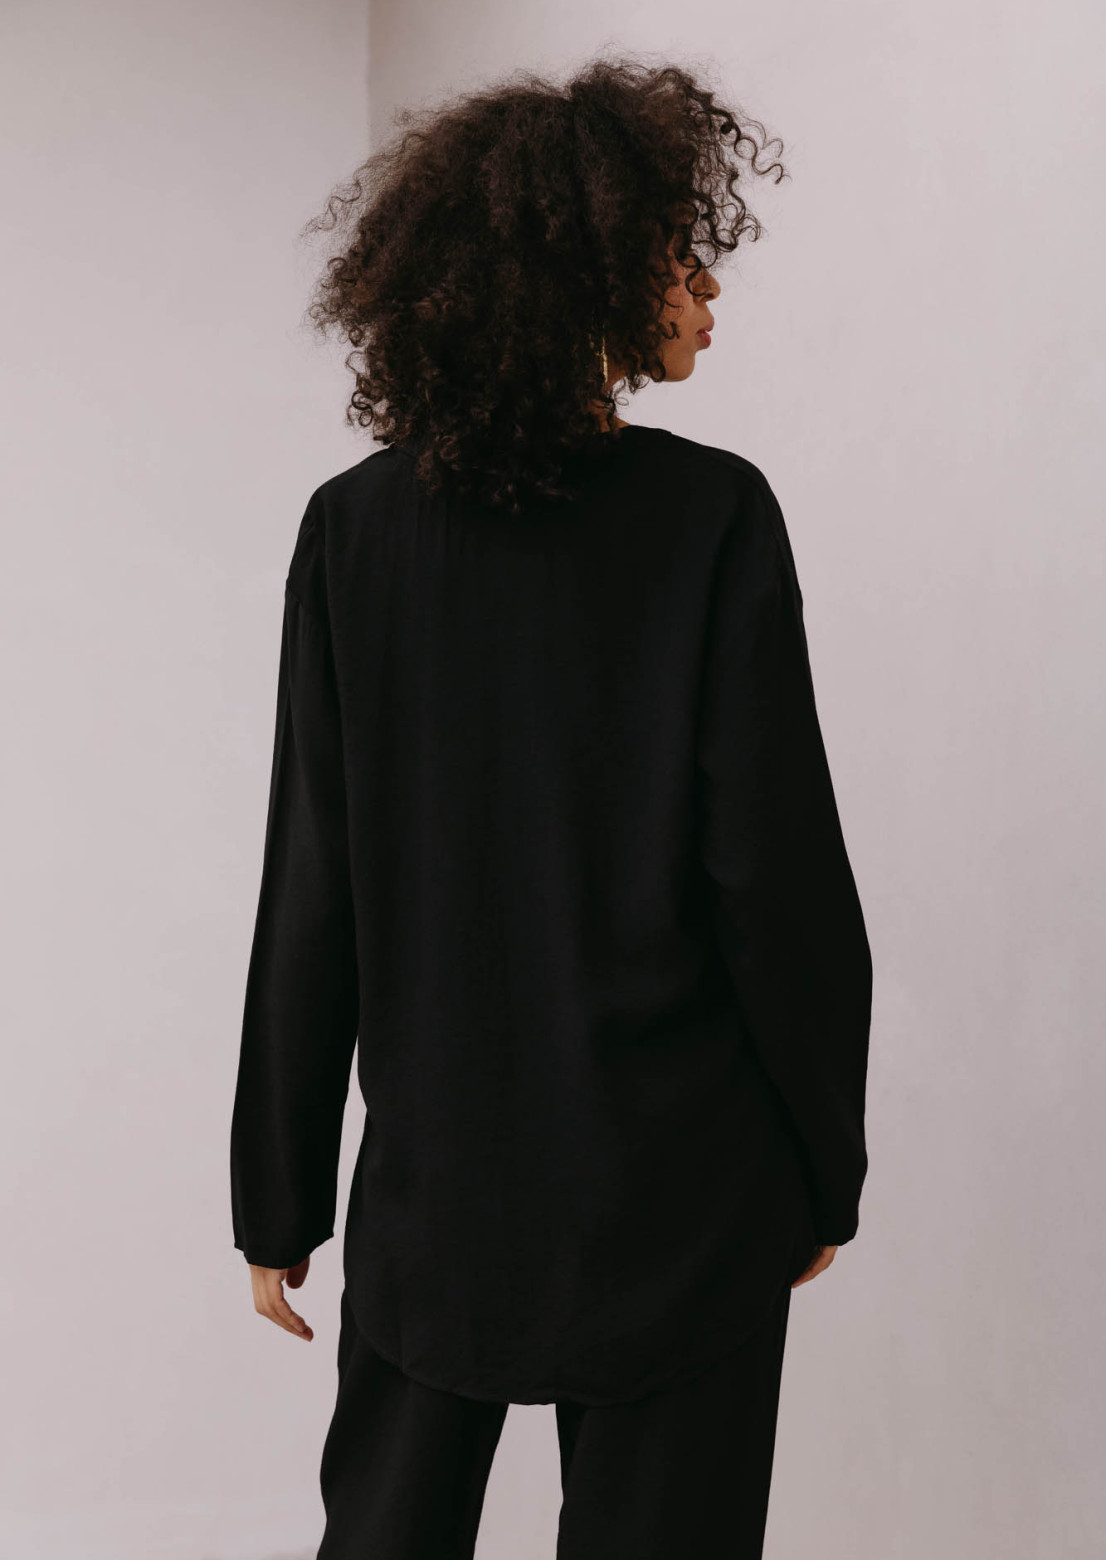 Black colour shirt with a stand-up collar